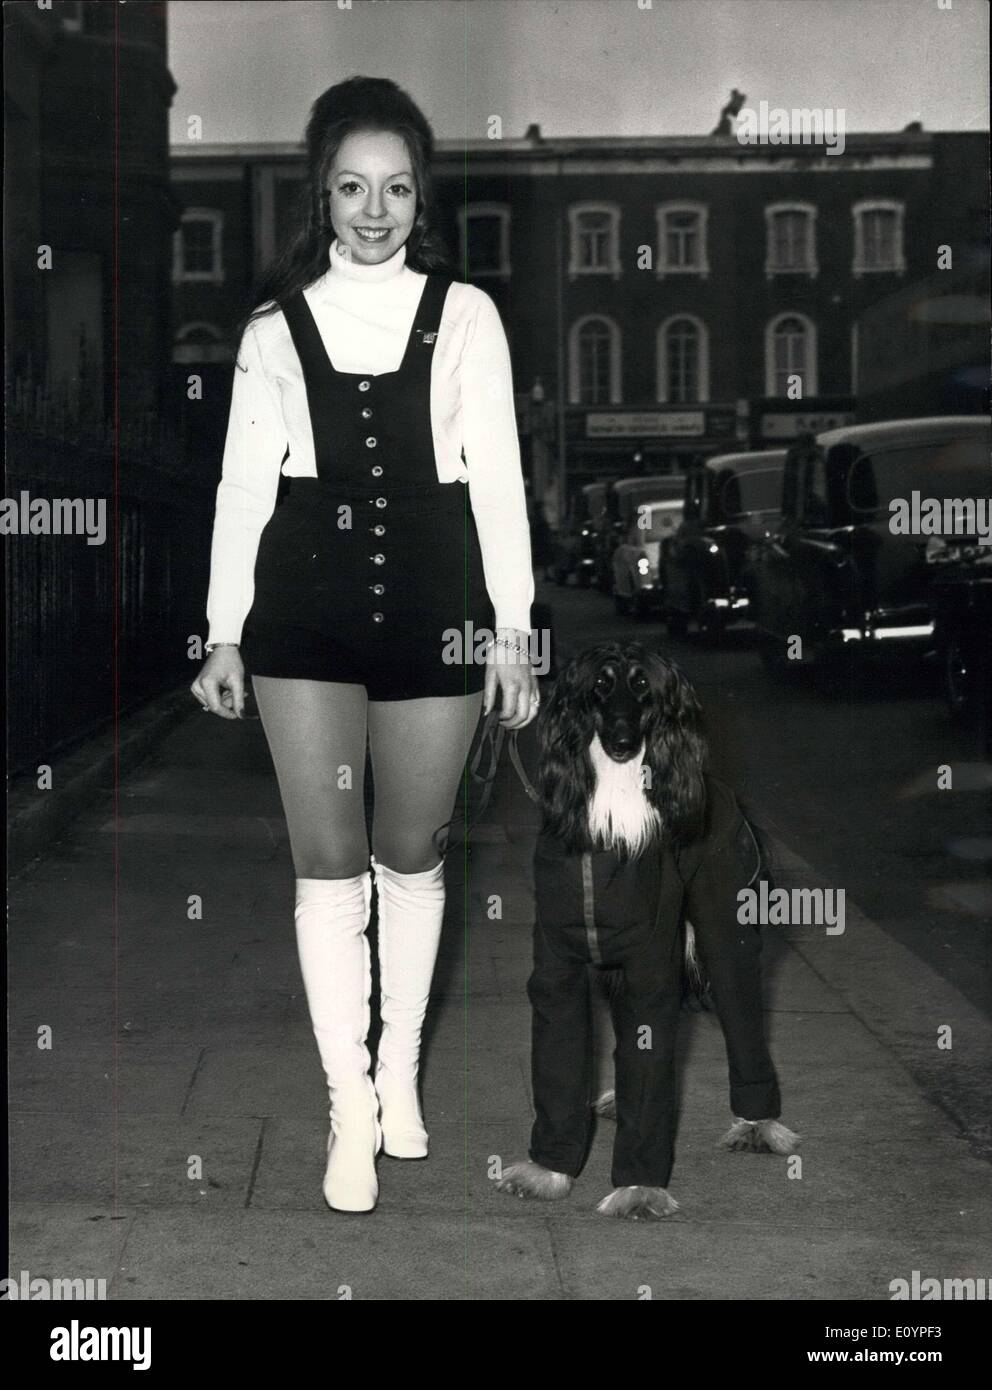 Feb. 05, 1971 - Cruft Dog Show. keystone Photo Shows: 18 year Edwina Rigby of Birmingham, wearing shorts as she arrived with an Stock Photo